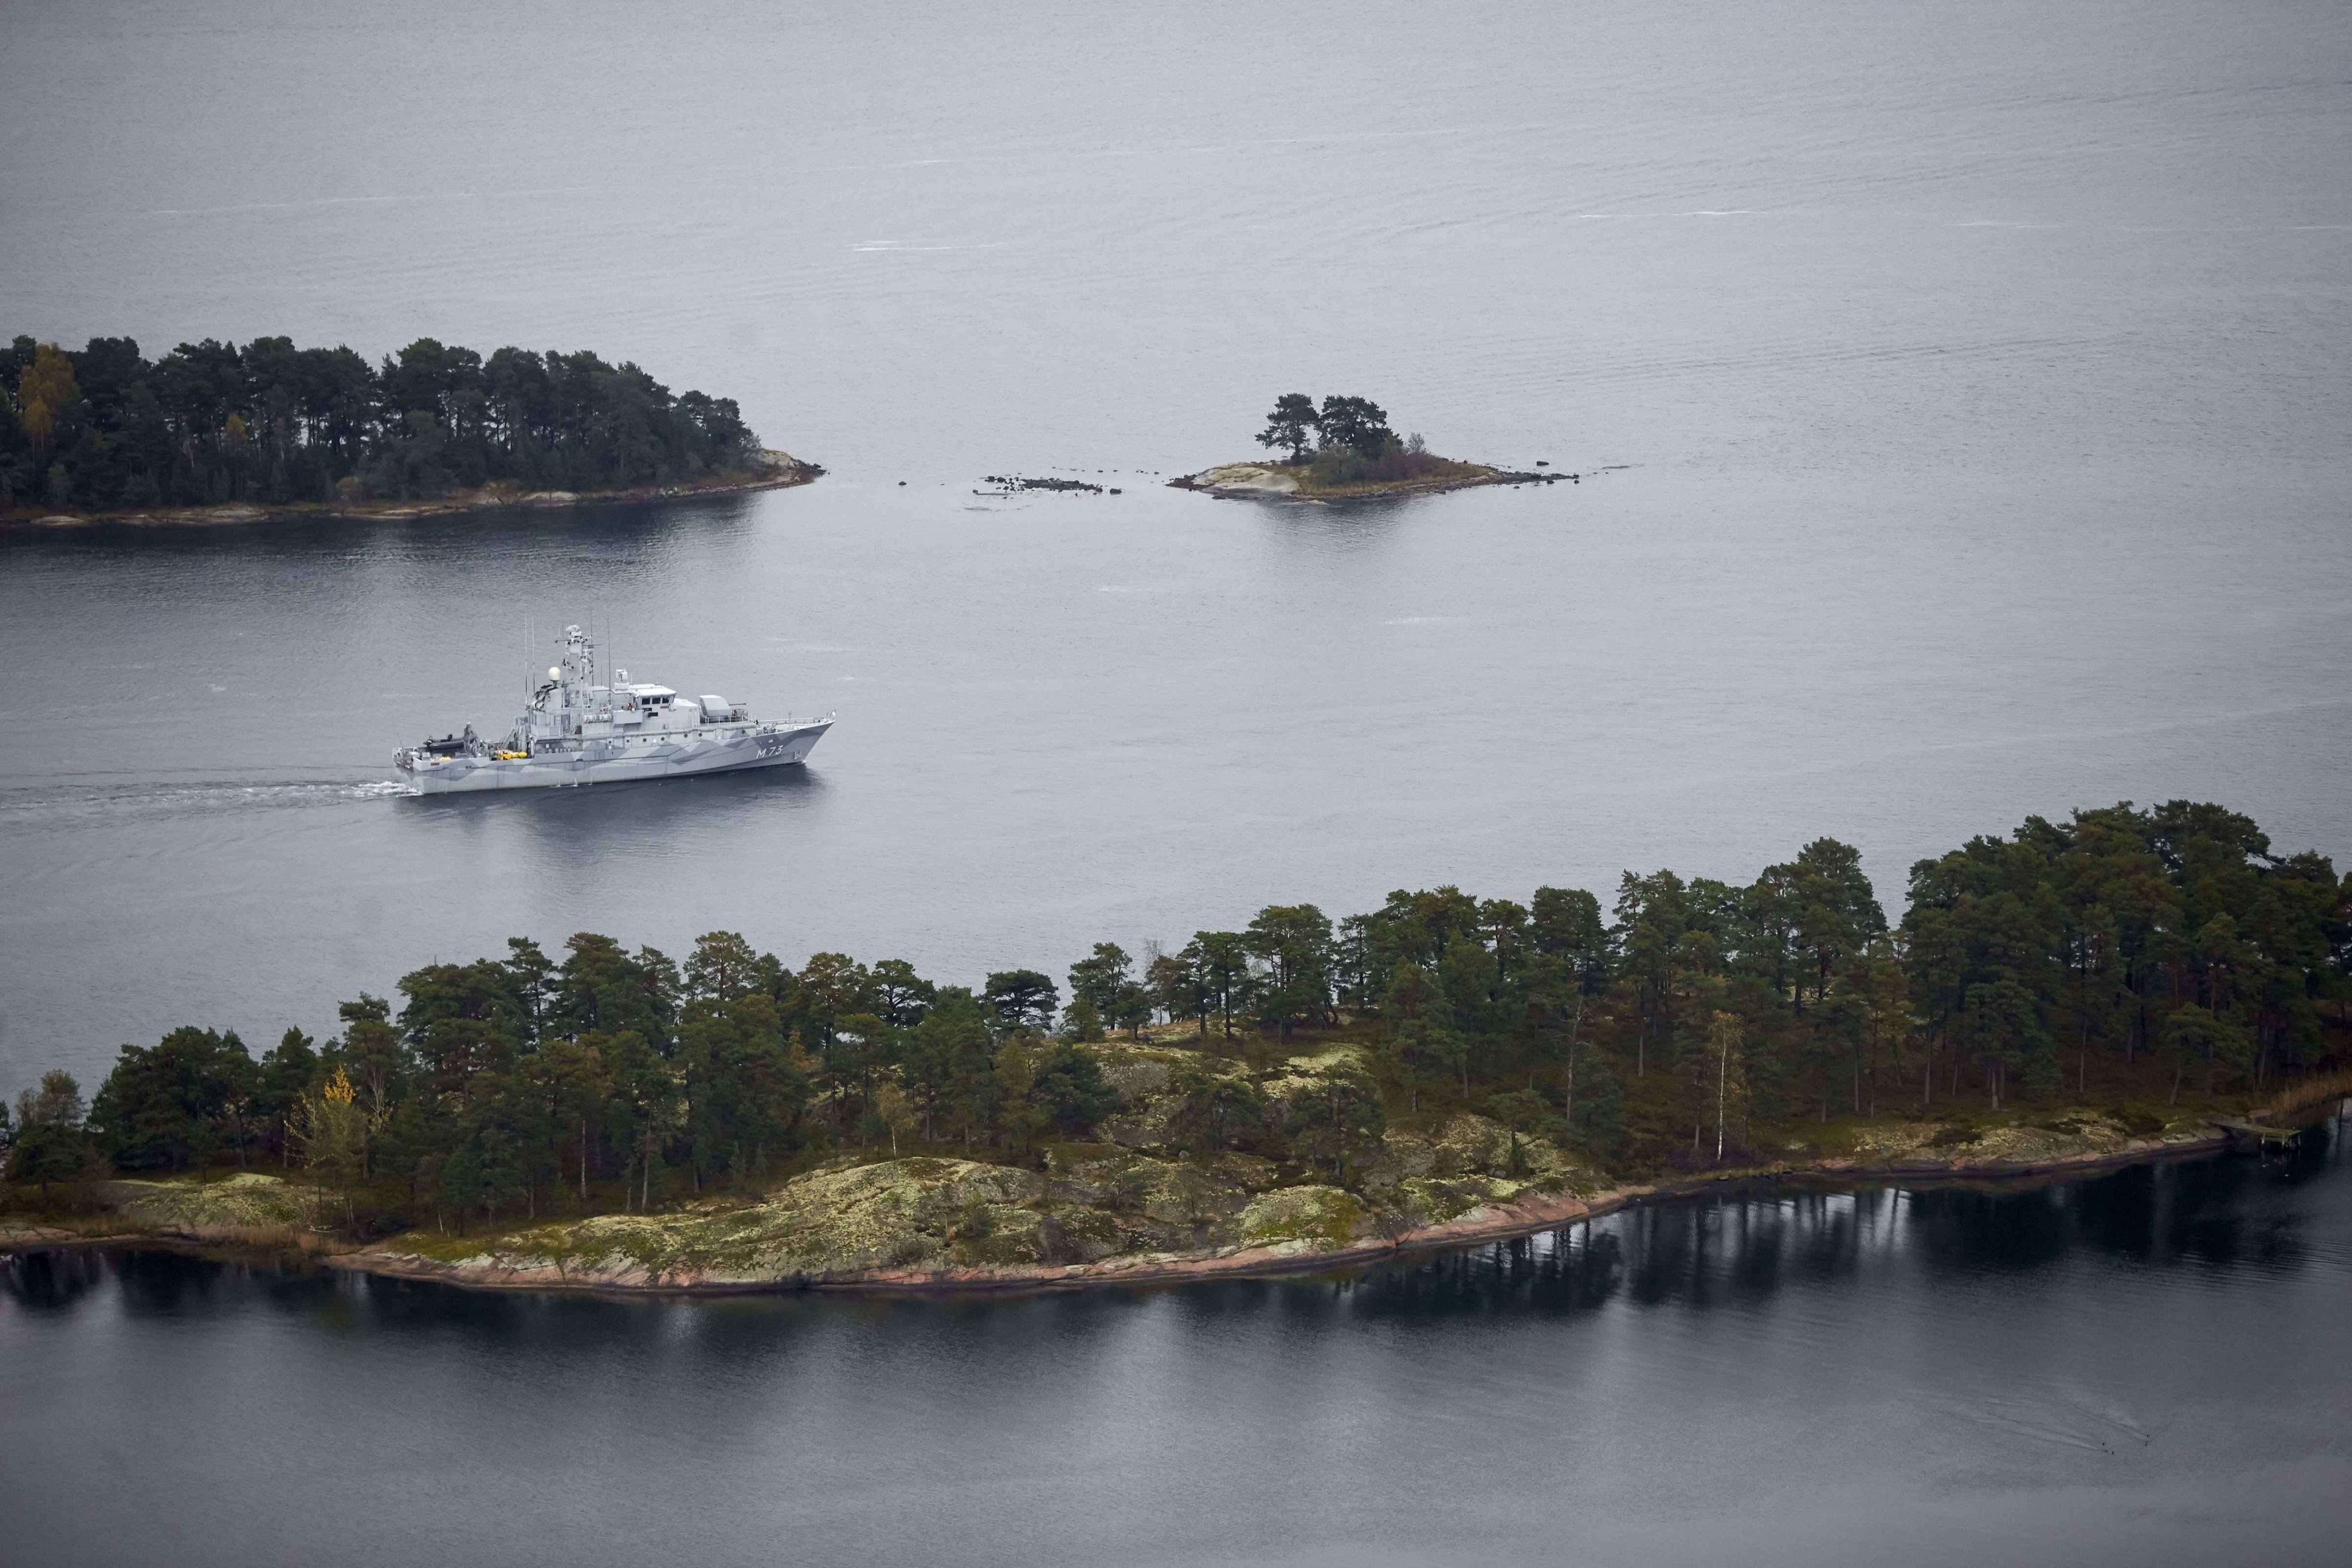 Swedish minesweeper HMS Koster searching for what the military says is a foreign threat in the waters in the Stockholm Archipelago, Sweden, on Oct. 19 2014. (Marko Saavala—AFP/Getty Images)